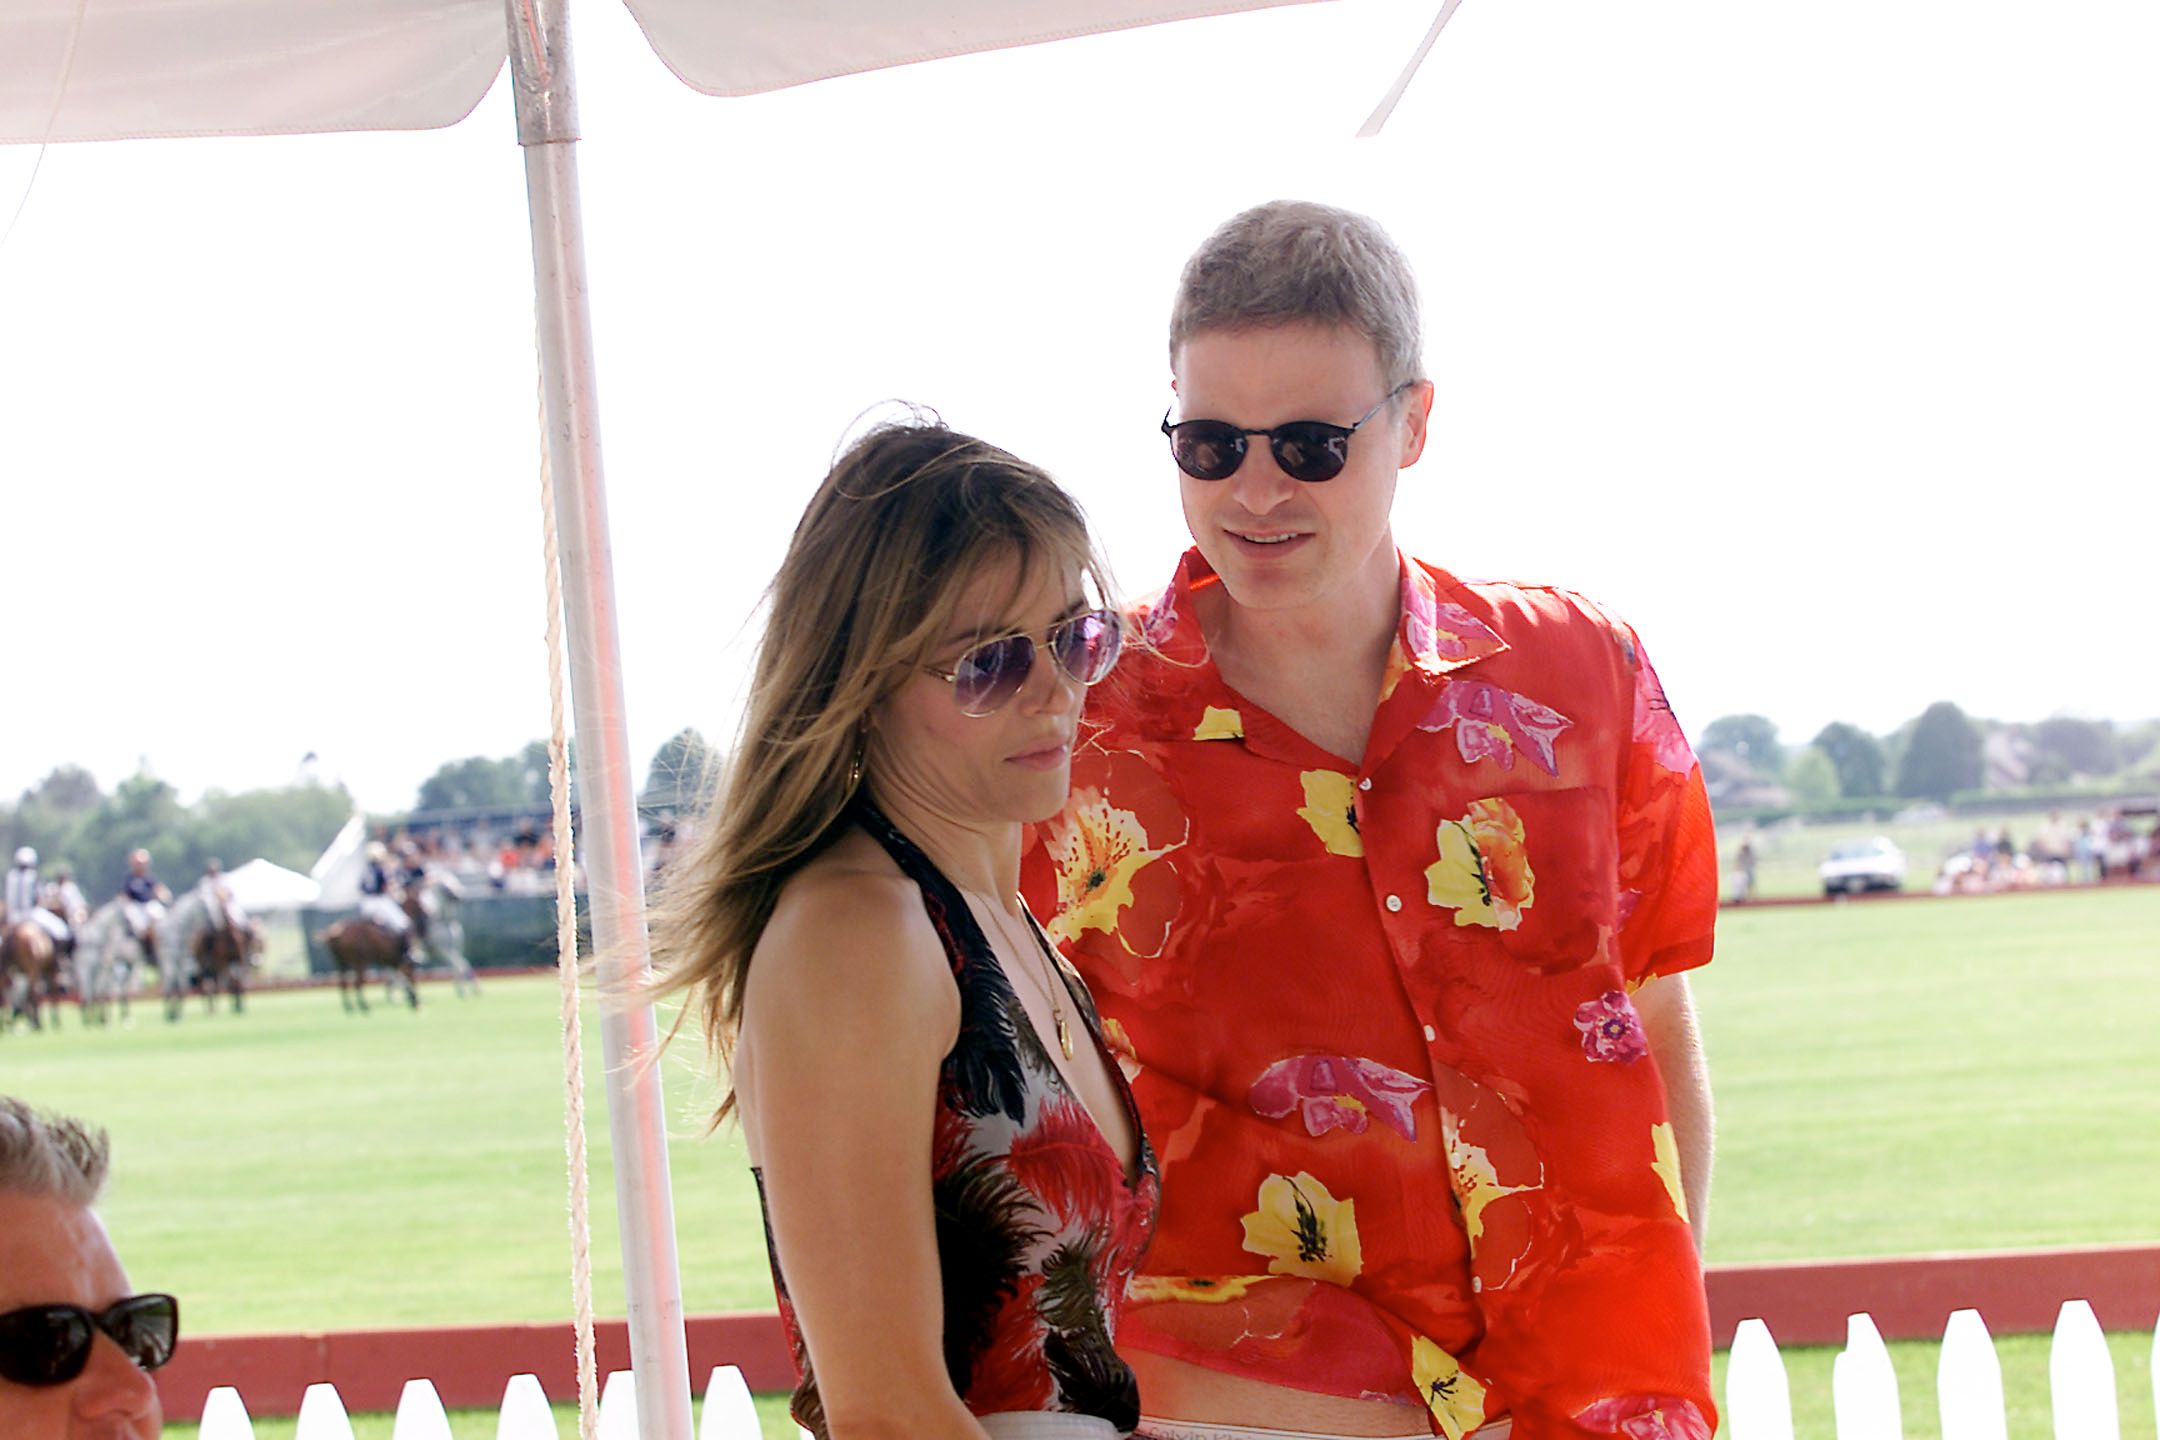 Elizabeth Hurley and Steven Bing at opening day at the Mercedes-Benz Polo Challenge at the Bridgehampton Polo Club in Bridgehampton, New York, June 14, 2001. | Source: Getty Images